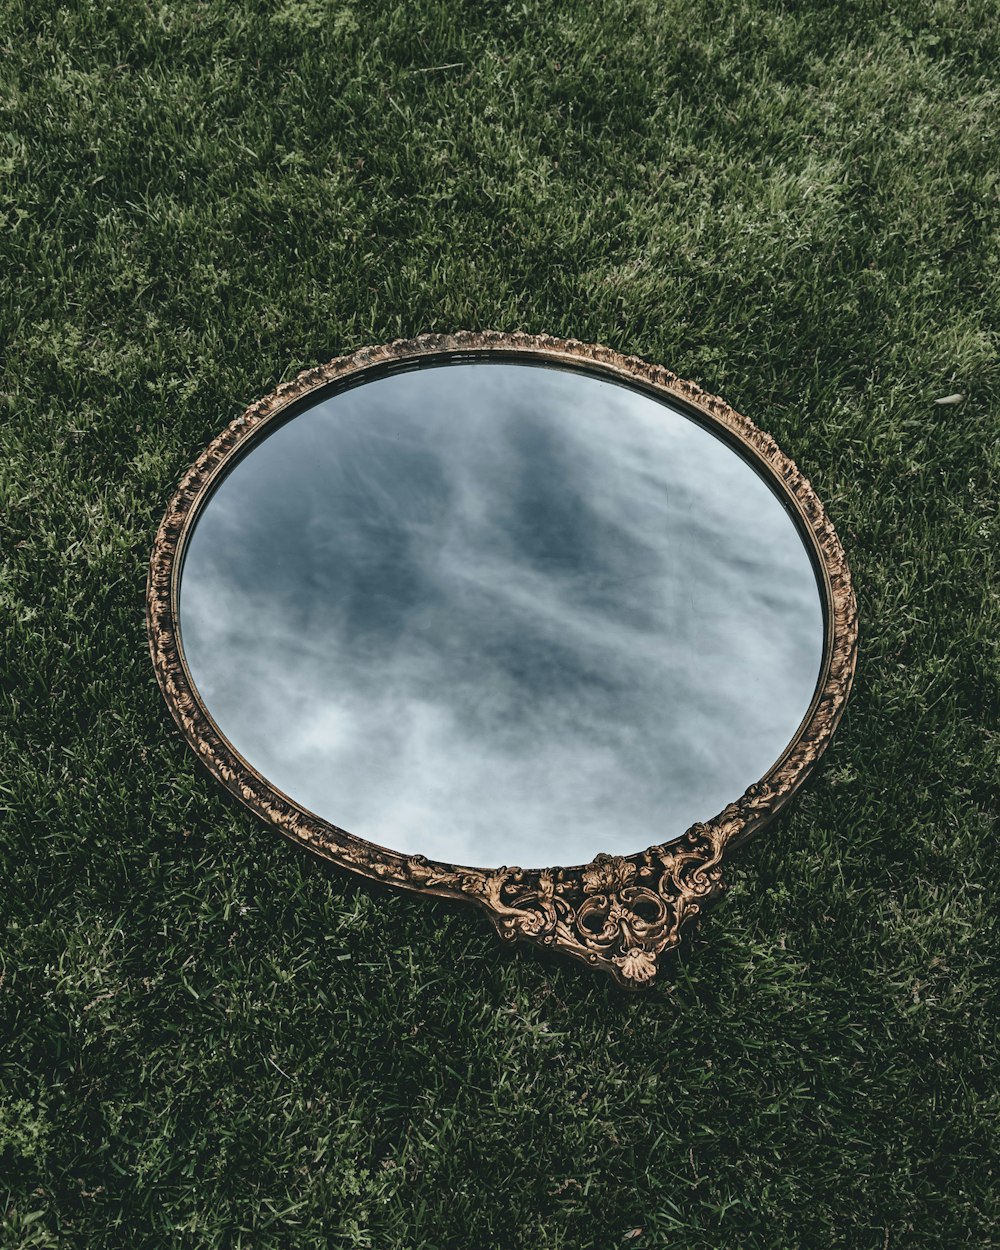 oval mirror with brown wooden frame on green grass